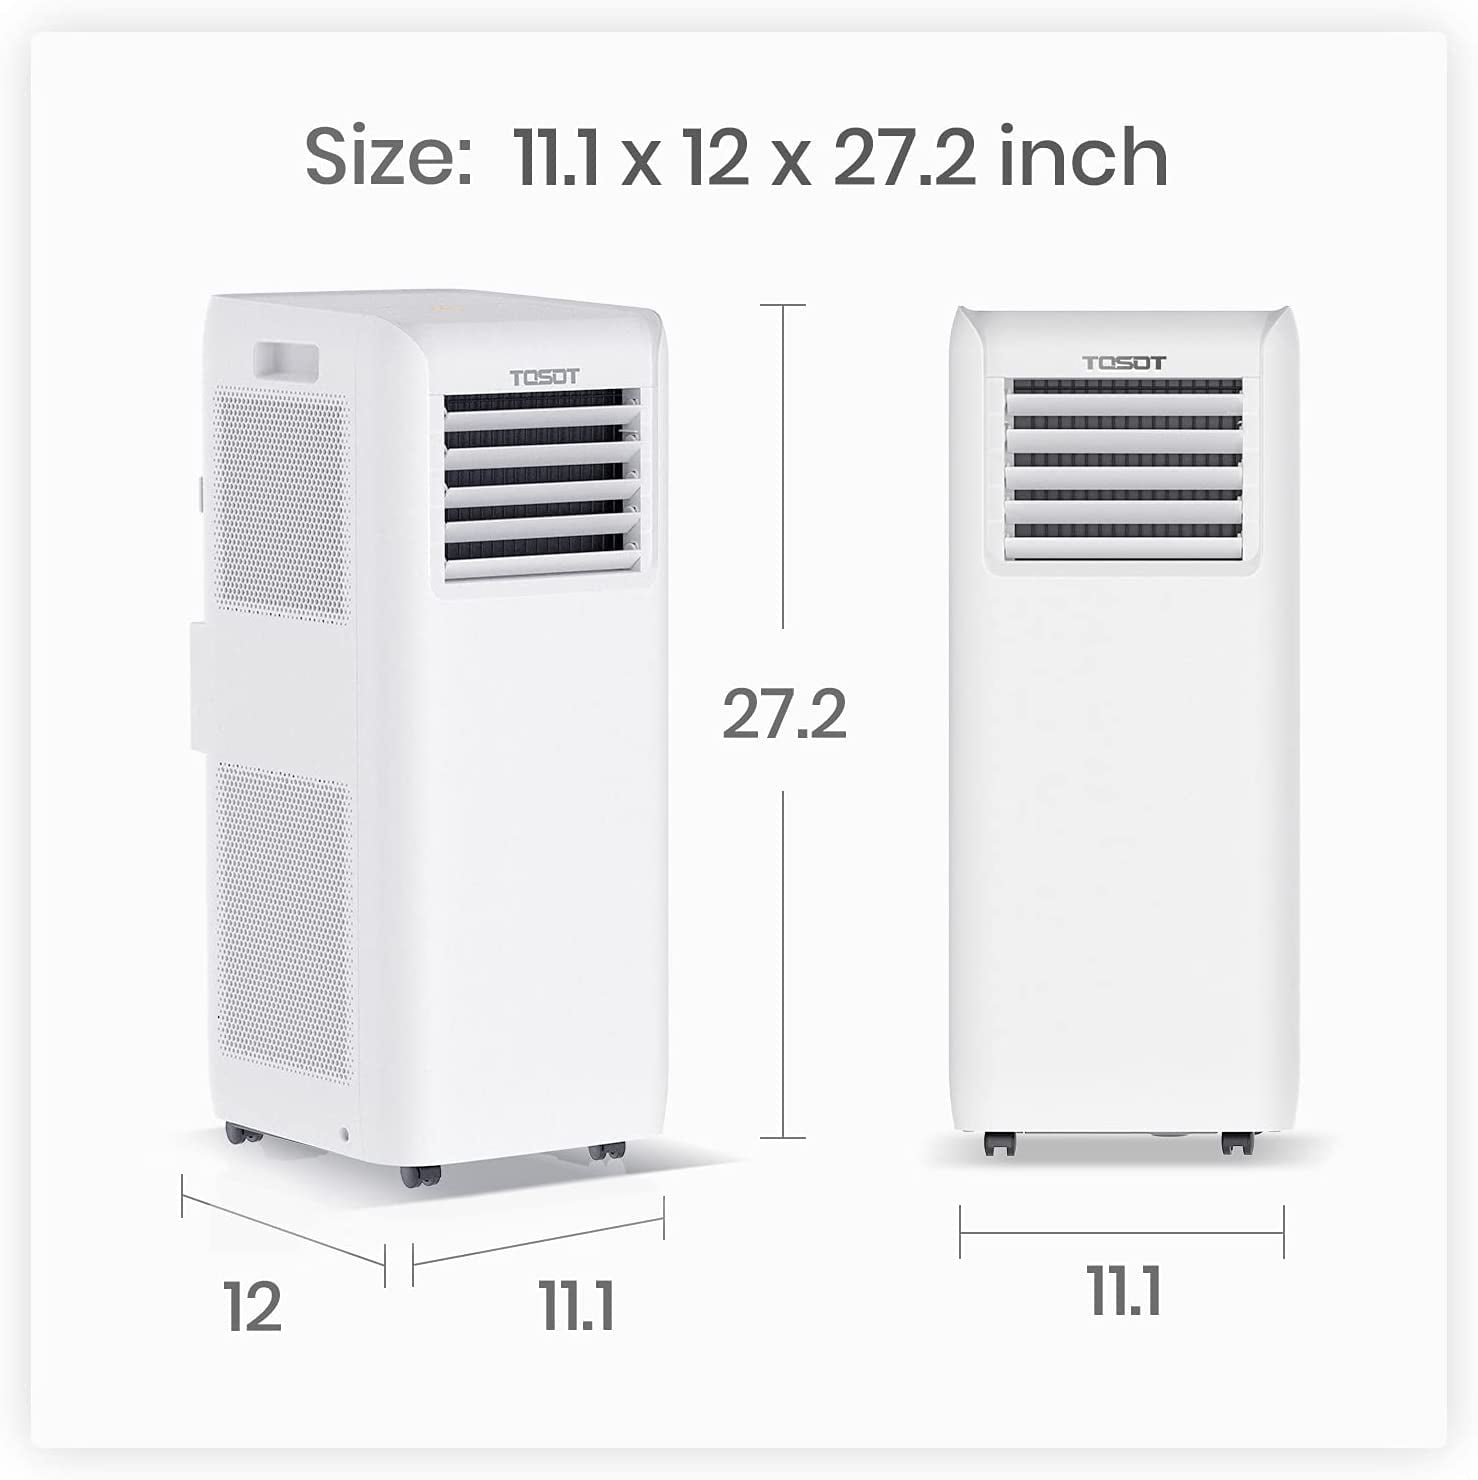 grund absolutte Polar TOSOT 10,000 BTU Portable Air Conditioner, Easier to Install, Quiet and  3-in-1 Portable AC, Dehumidifier, Fan for Rooms Up To 300 sq ft, Aovia  Series - Walmart.com